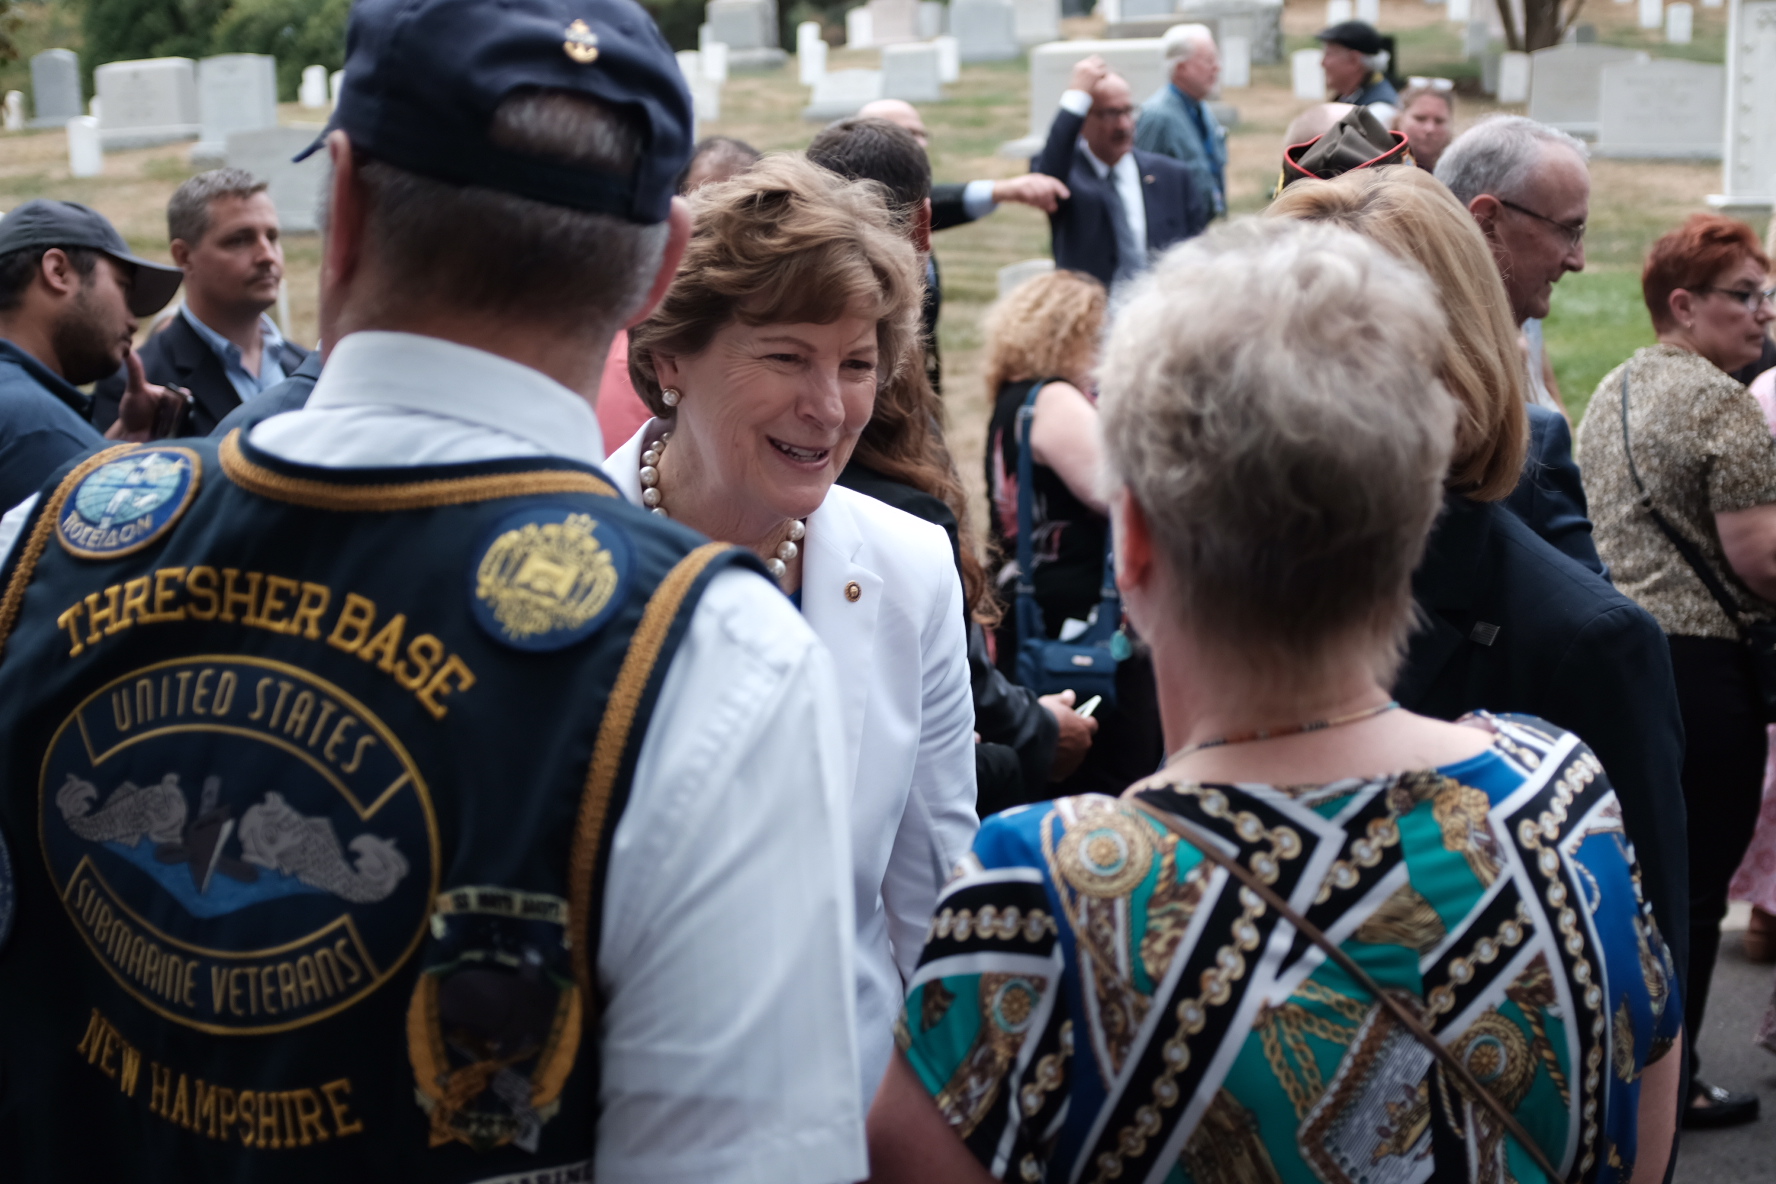 Shaheen talking to guests at Thresher ceremony